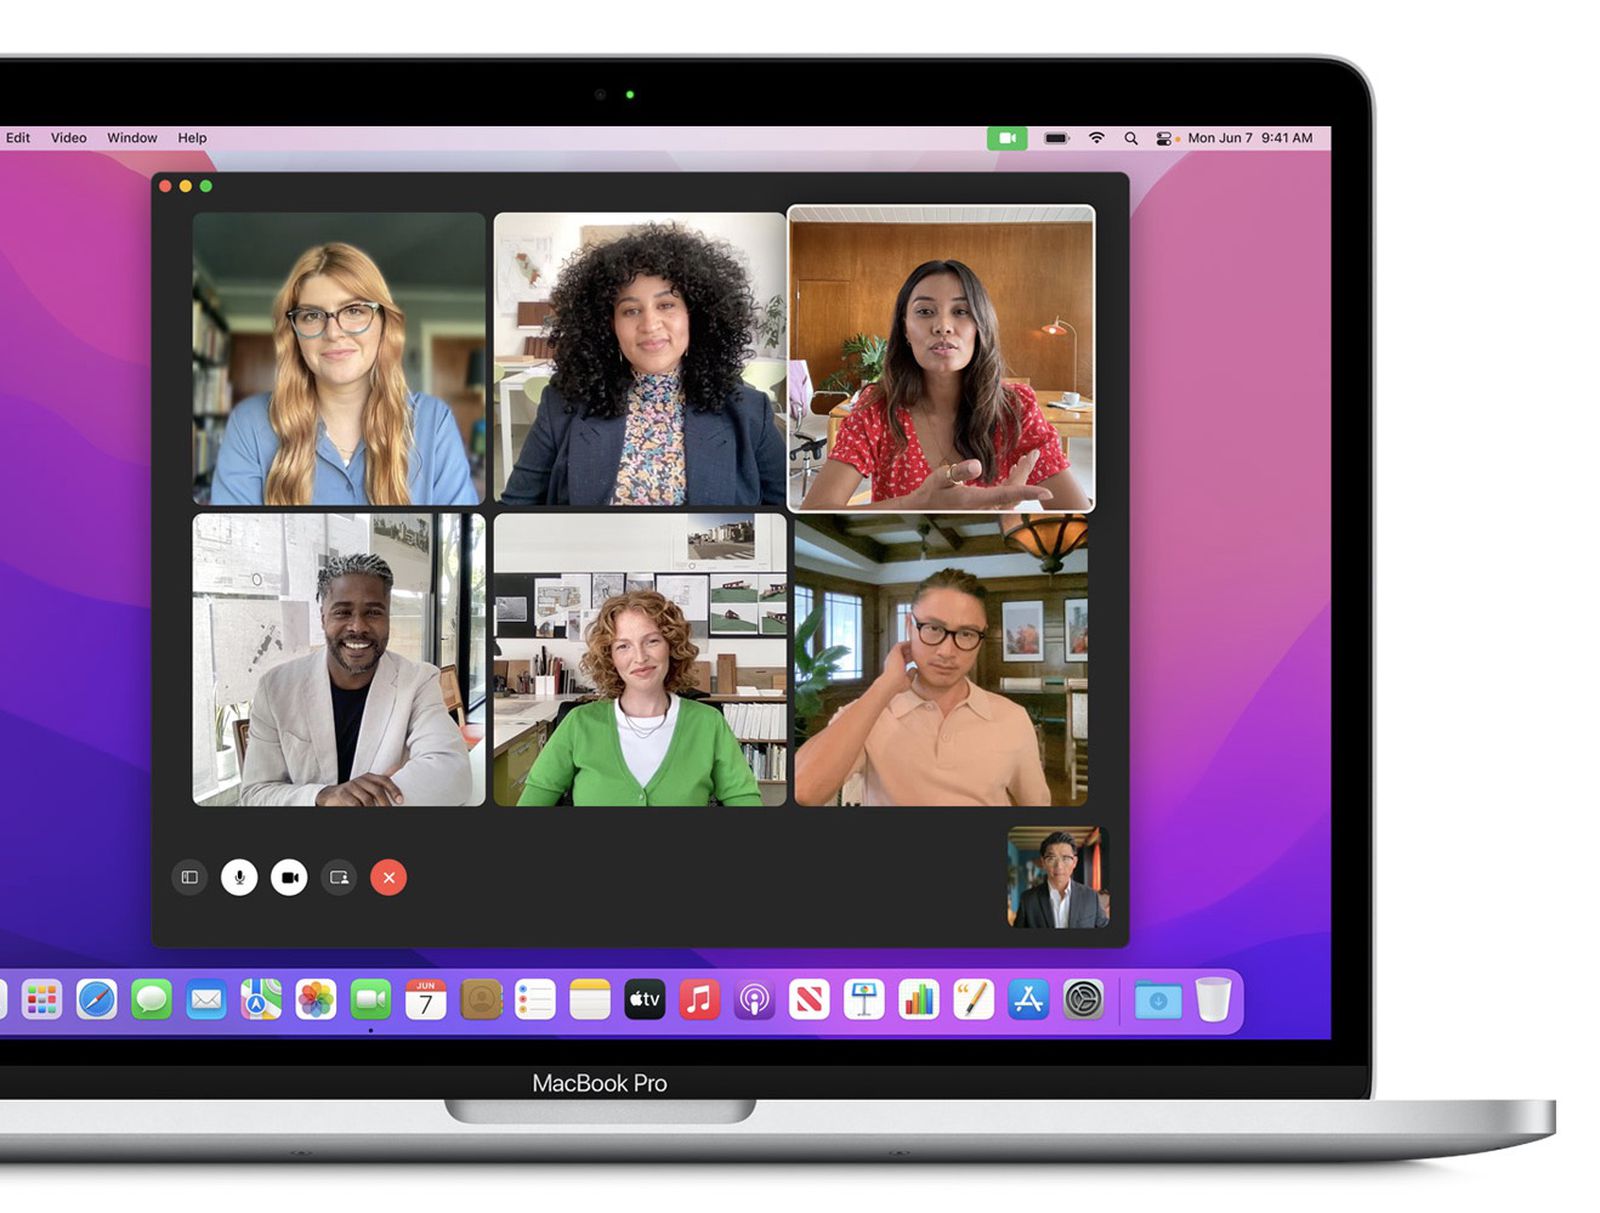 Can You Get FaceTime For Windows And PCs?